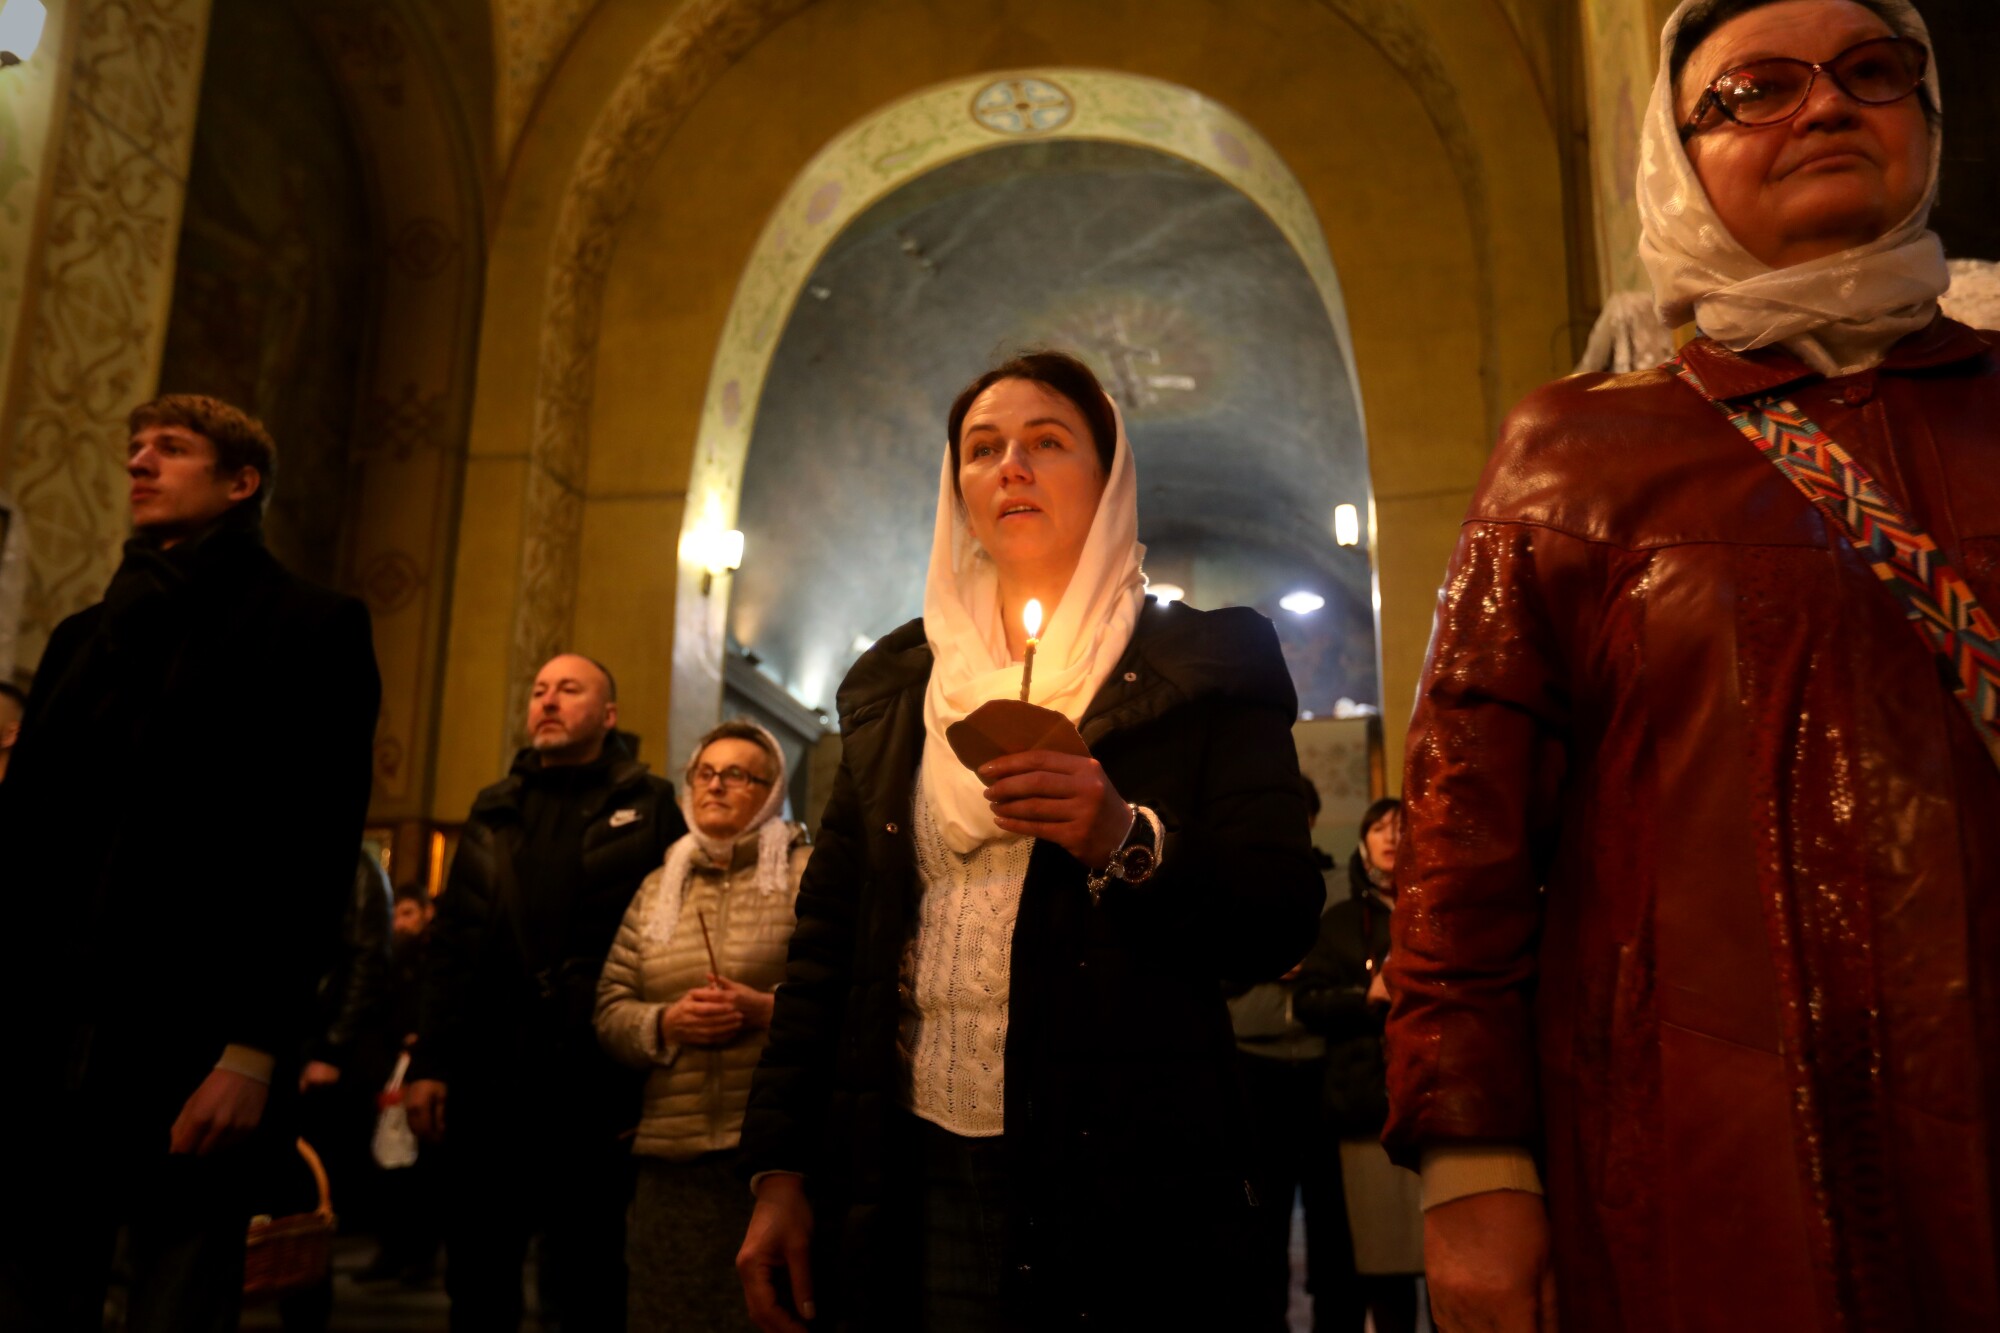 Worshipers stand in a church holding candles.